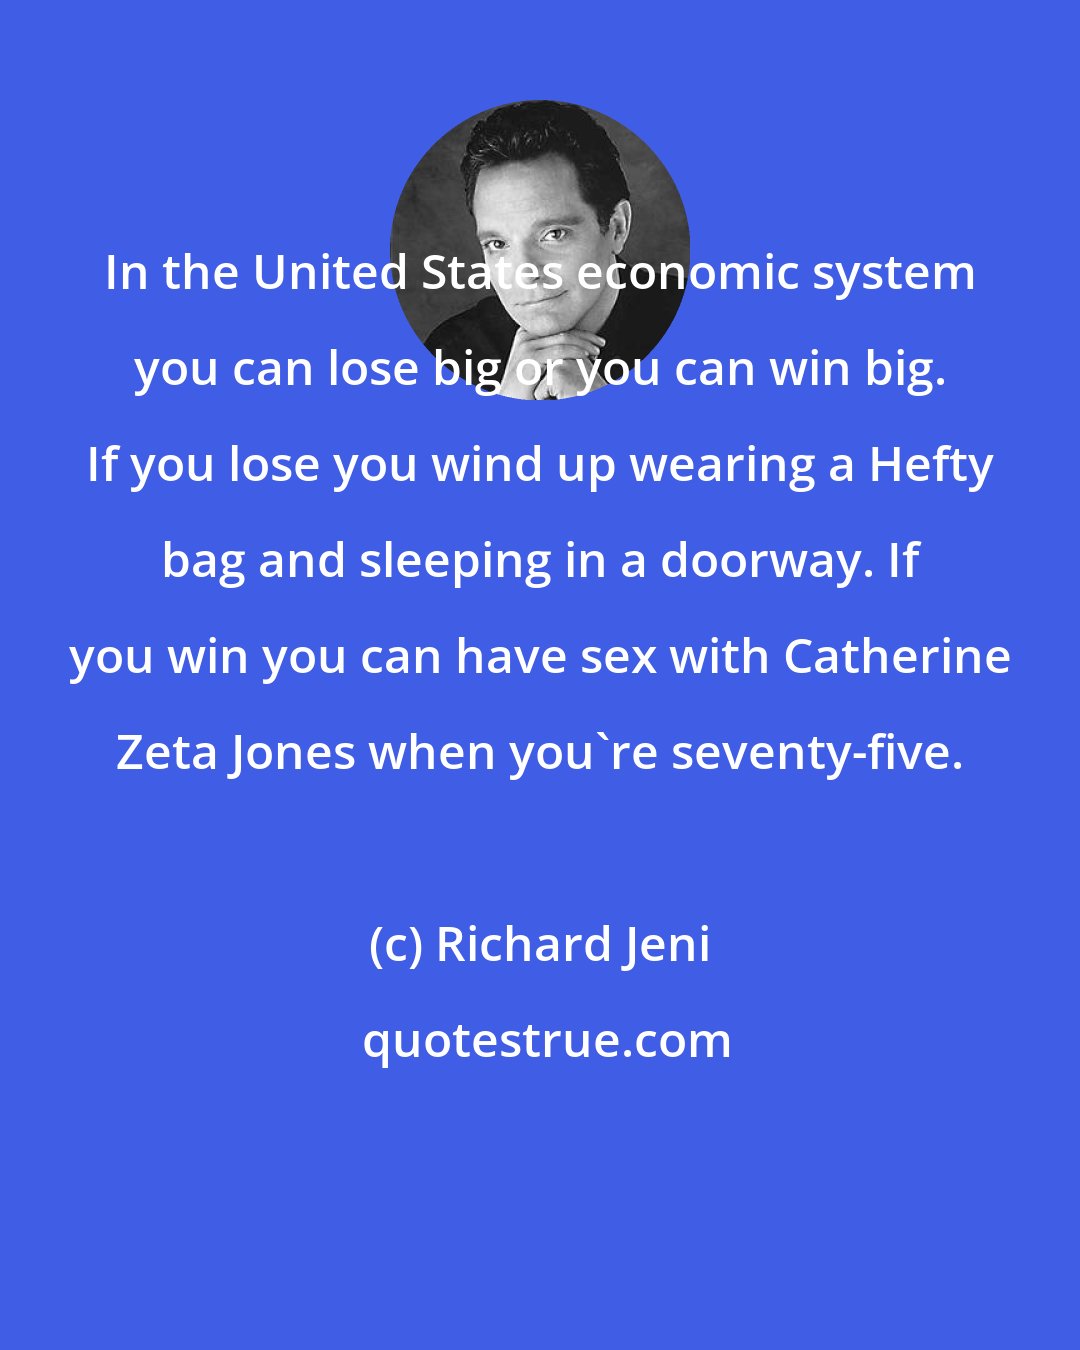 Richard Jeni: In the United States economic system you can lose big or you can win big. If you lose you wind up wearing a Hefty bag and sleeping in a doorway. If you win you can have sex with Catherine Zeta Jones when you're seventy-five.